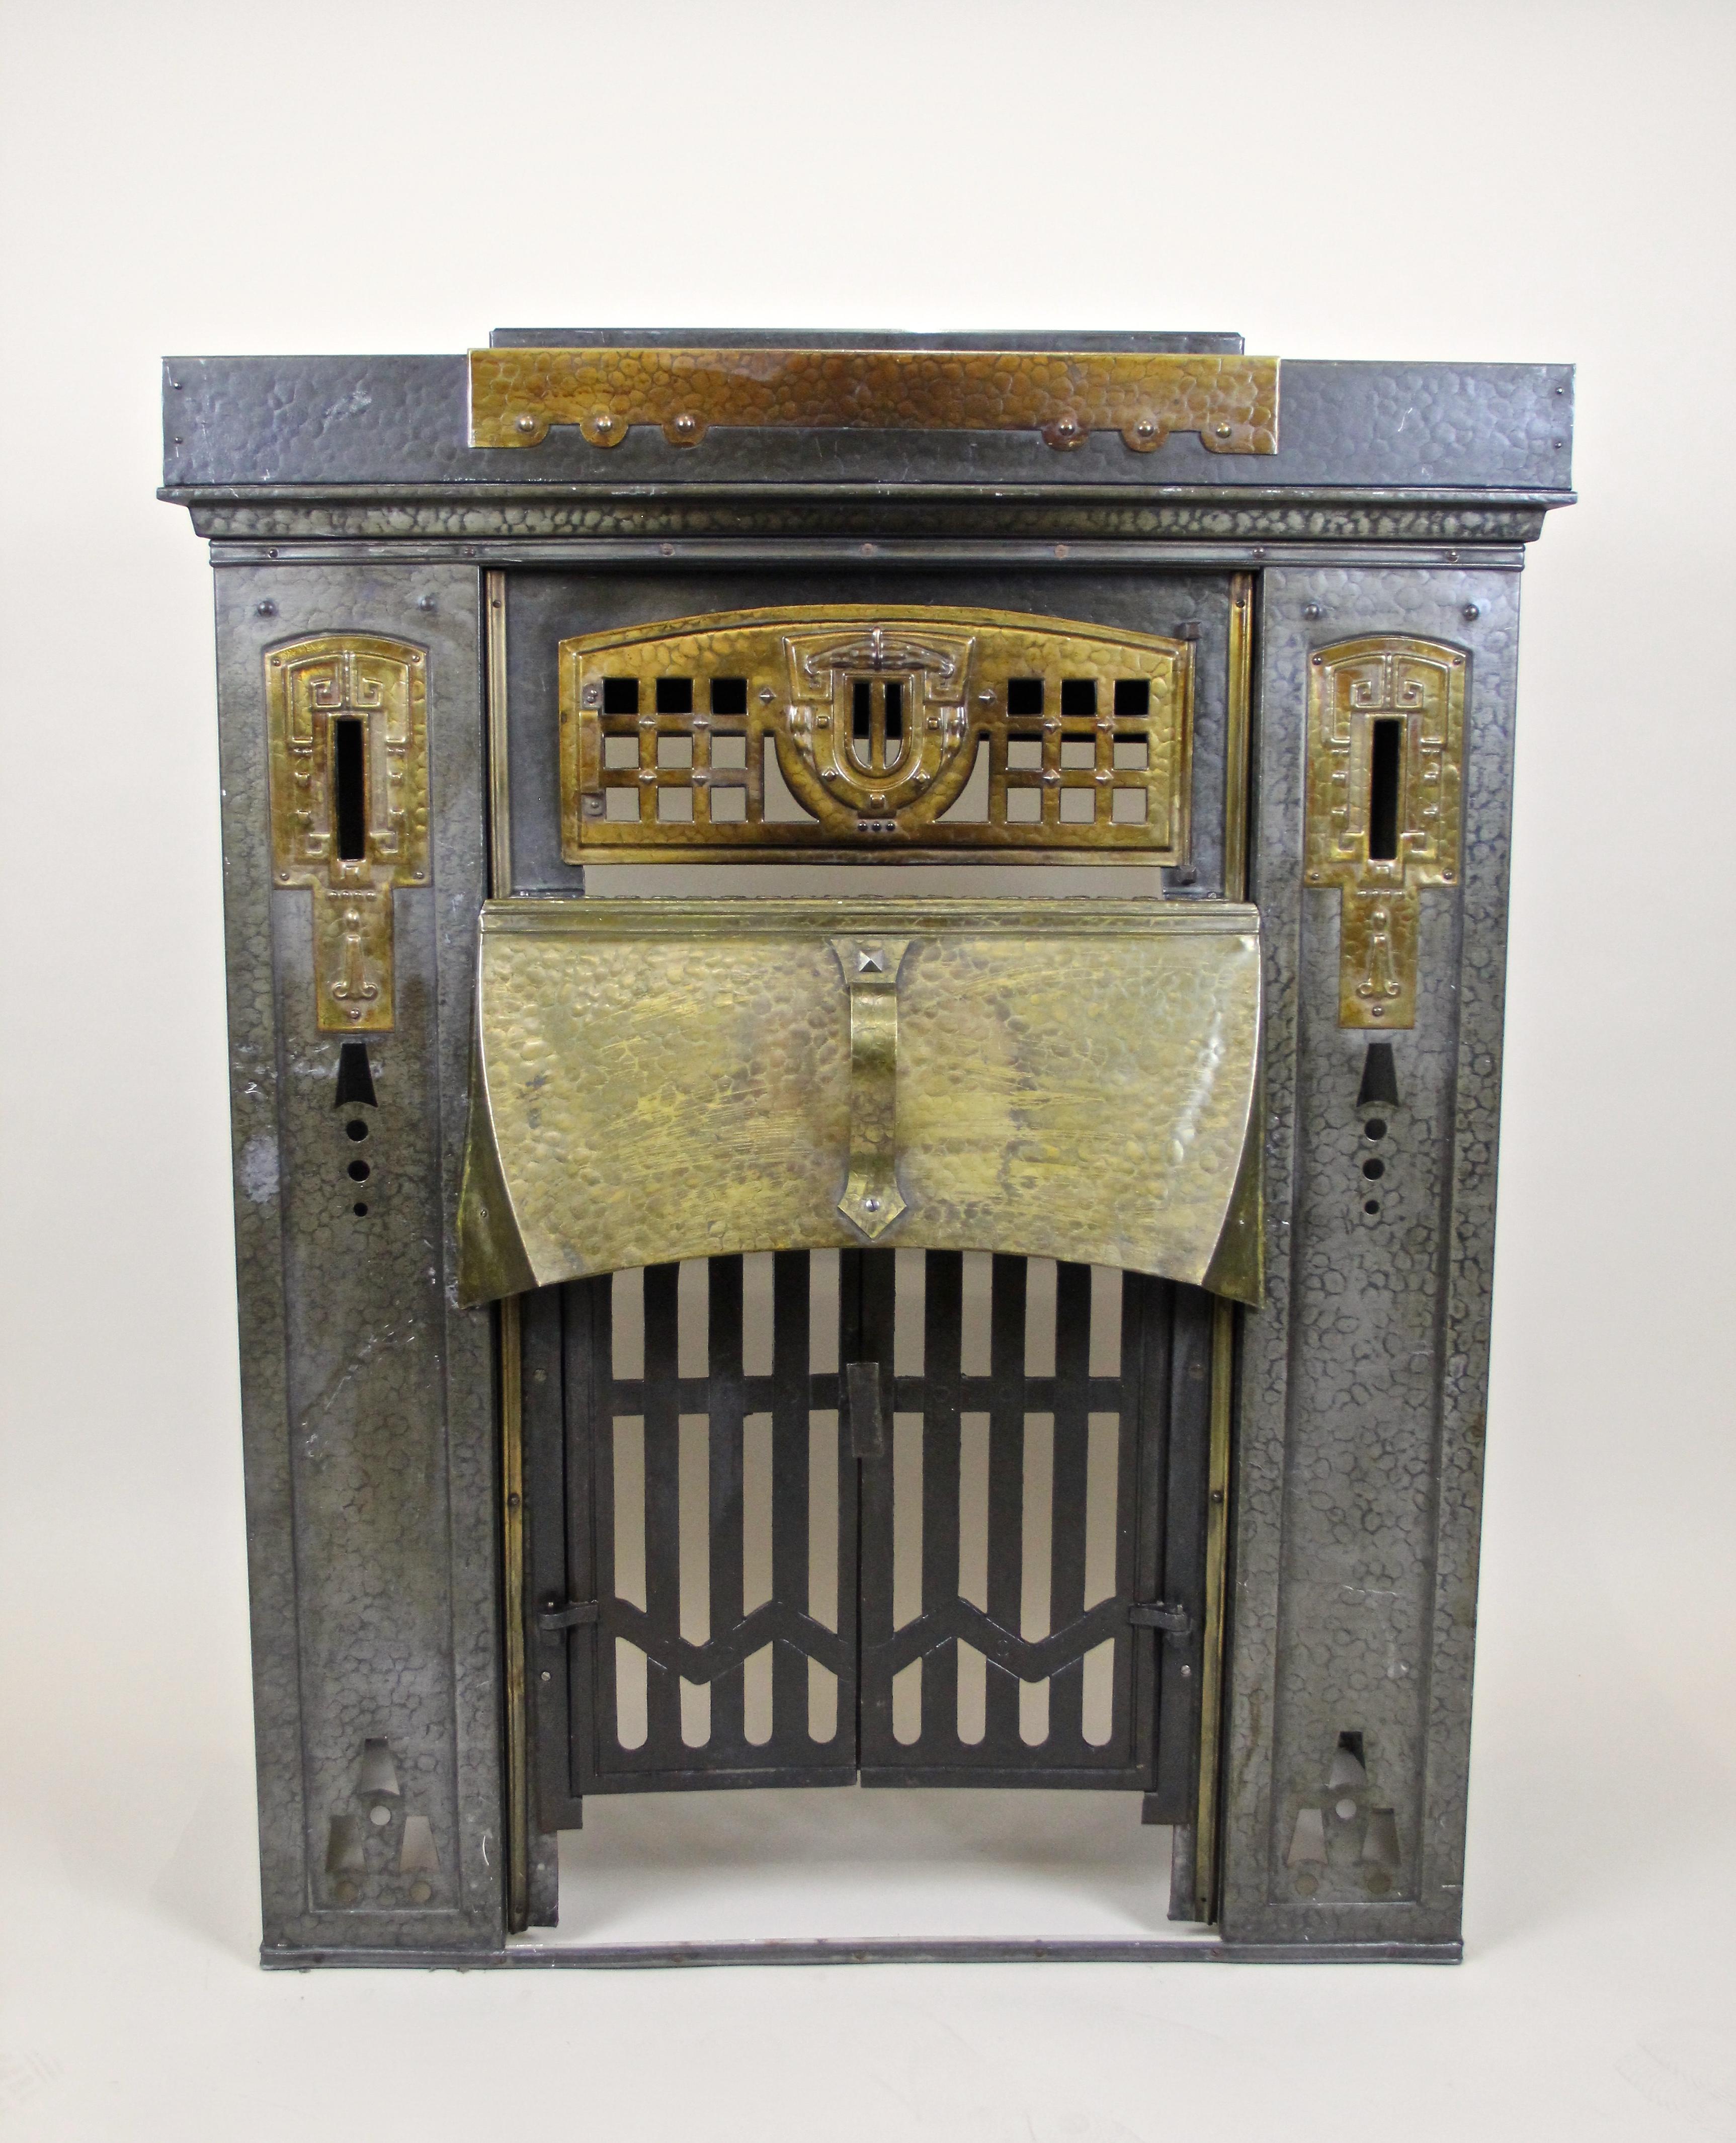 One of a kind early 20th century metal fireplace from the Art Nouveau period in Austria, circa 1900. This absolute unique fireplace was elaborately handcrafted and shows a beautiful hammered surface with fantastic cut Art Nouveau pattern on the